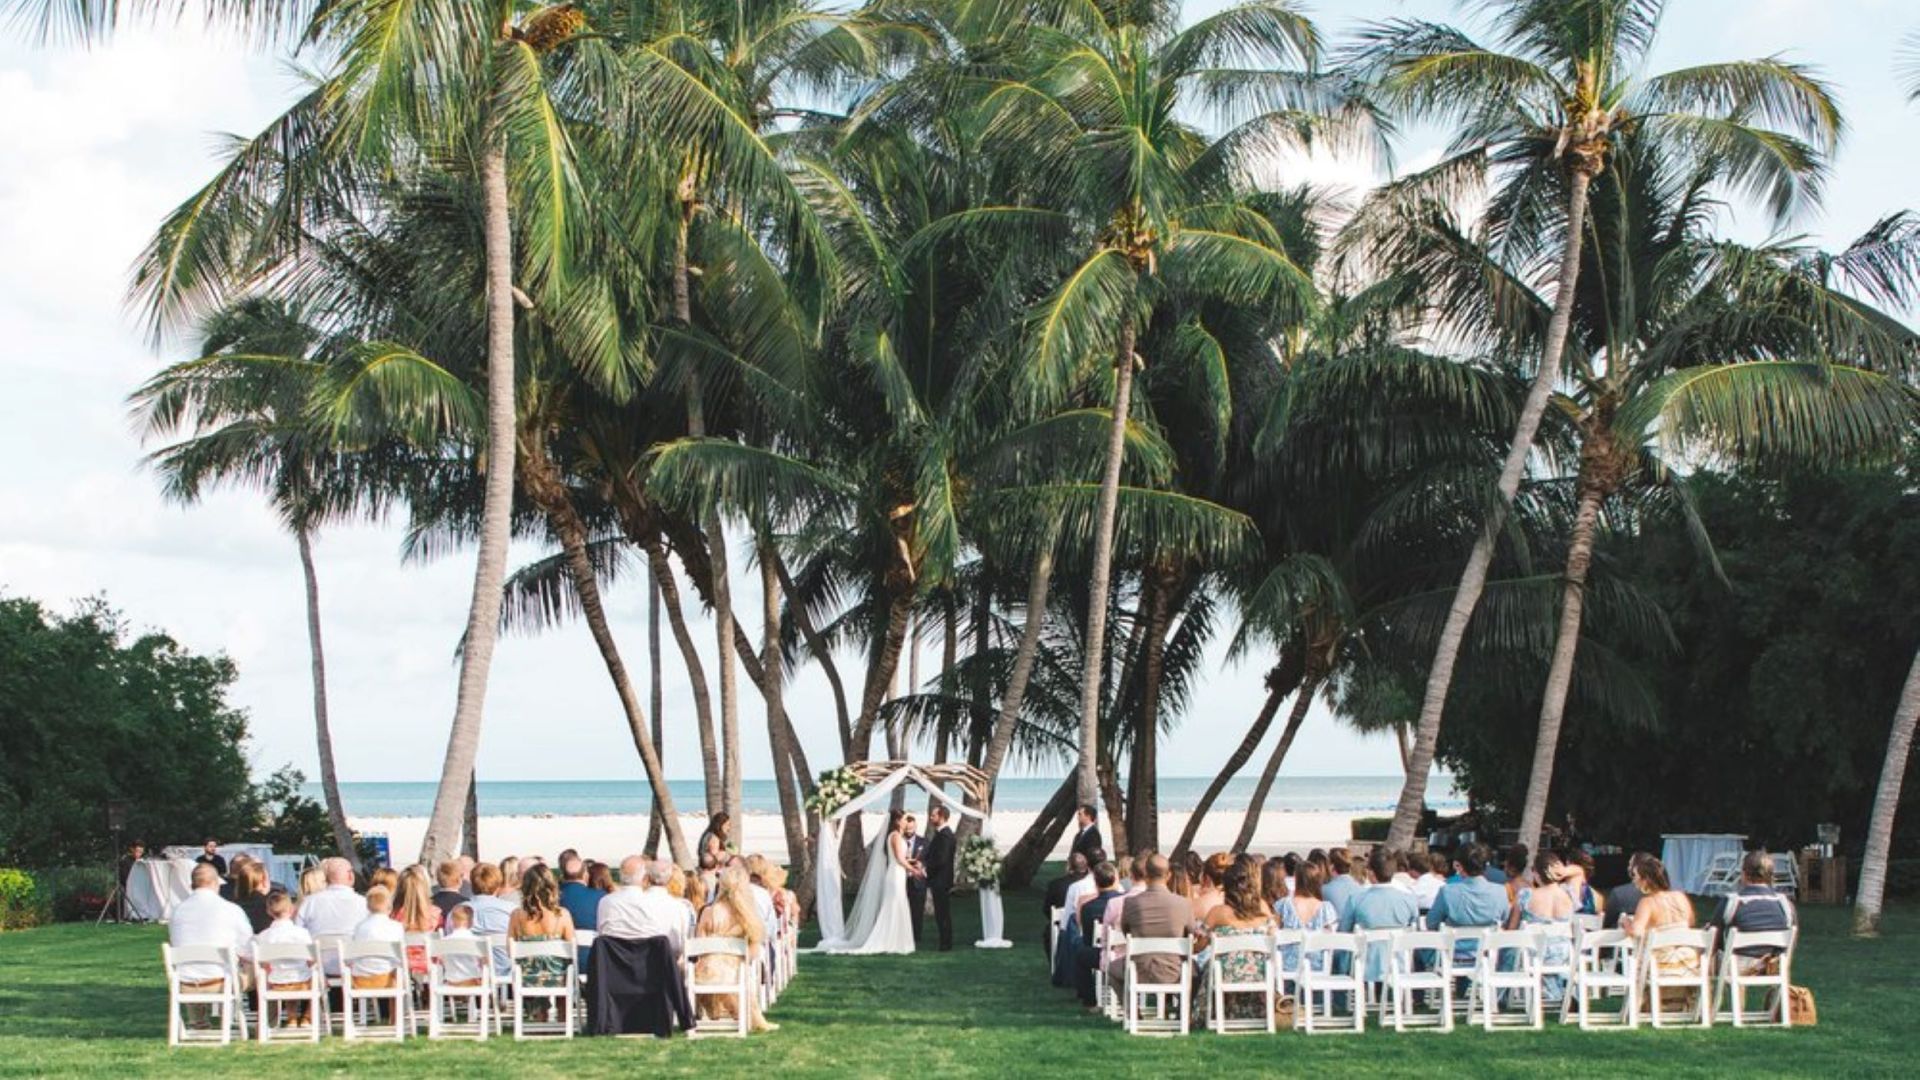 A Group Of People Sitting On Chairs In Front Of Palm Trees